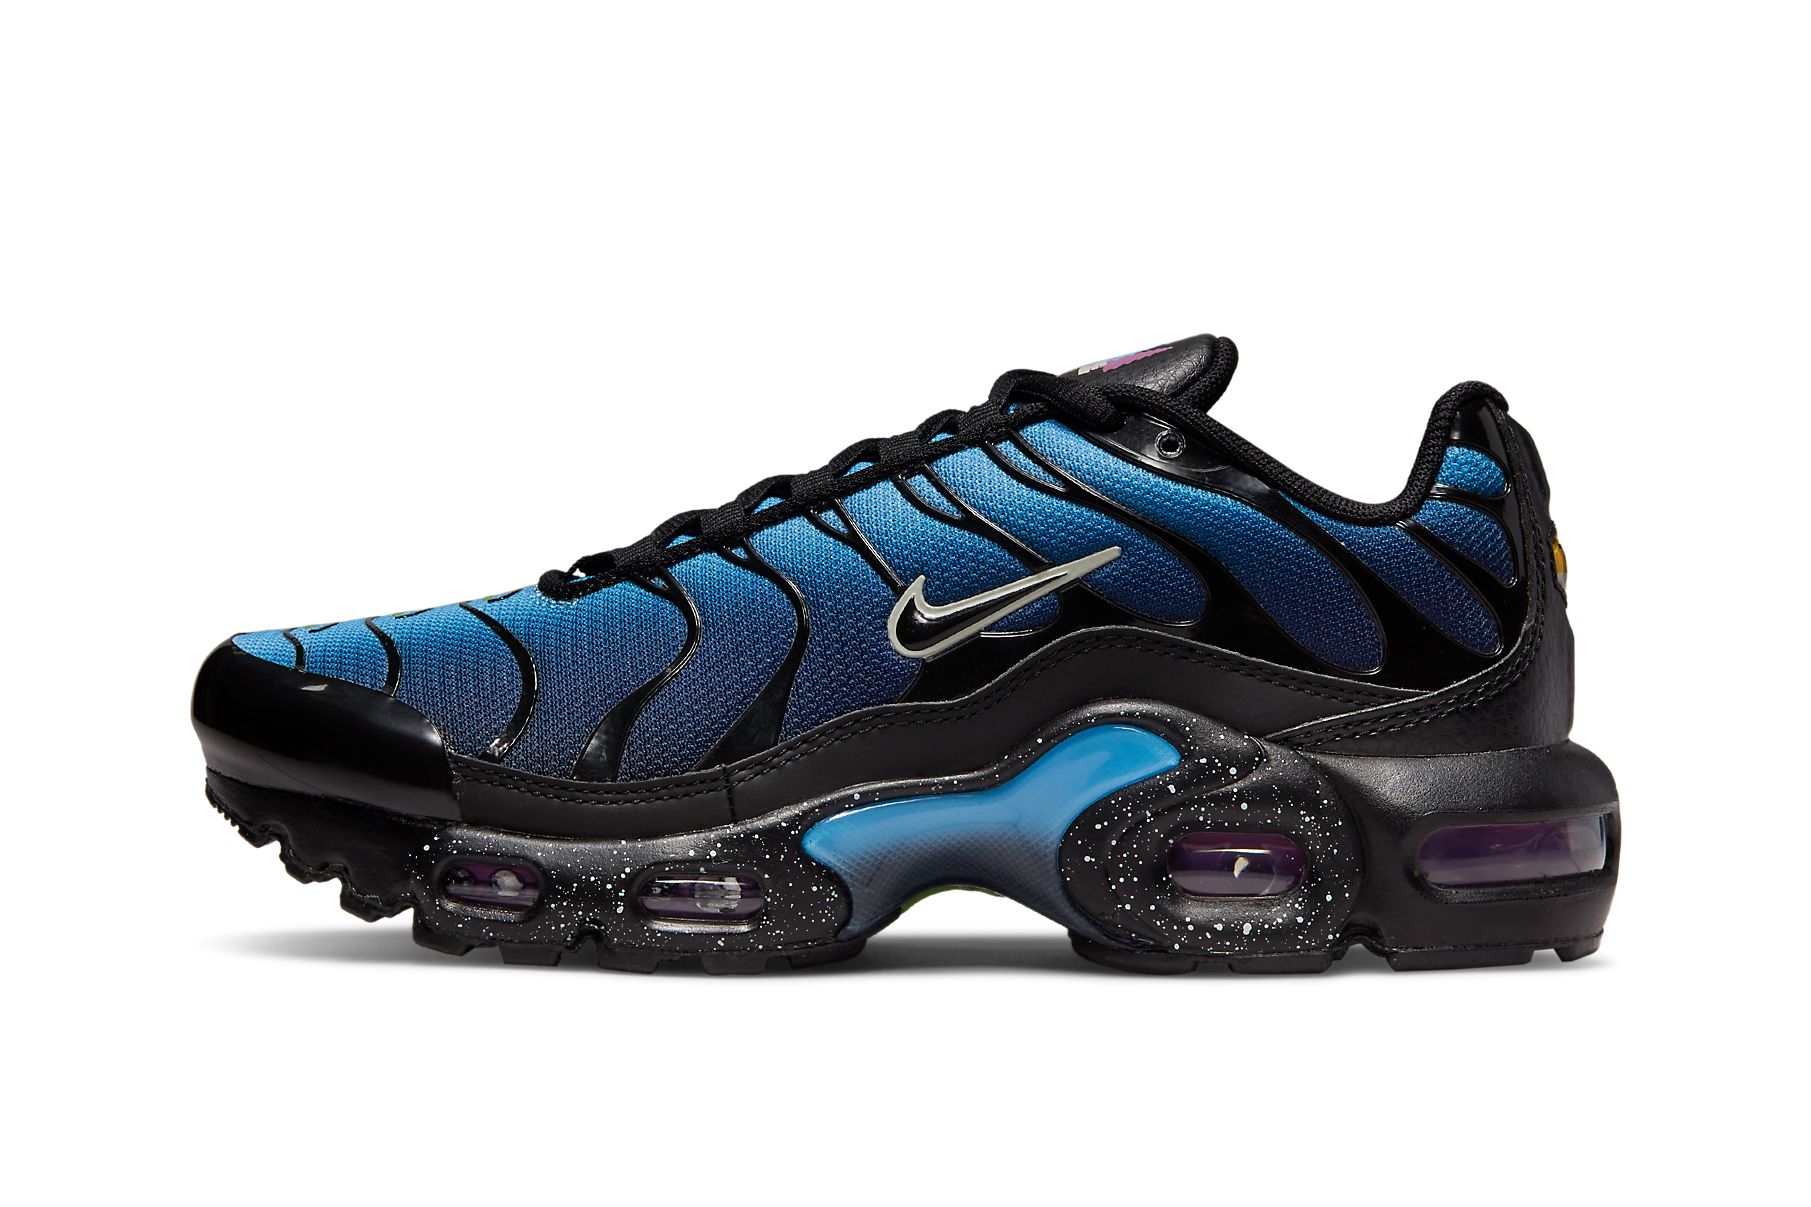 Nike Air Max Plus Blue and Black Outdoors